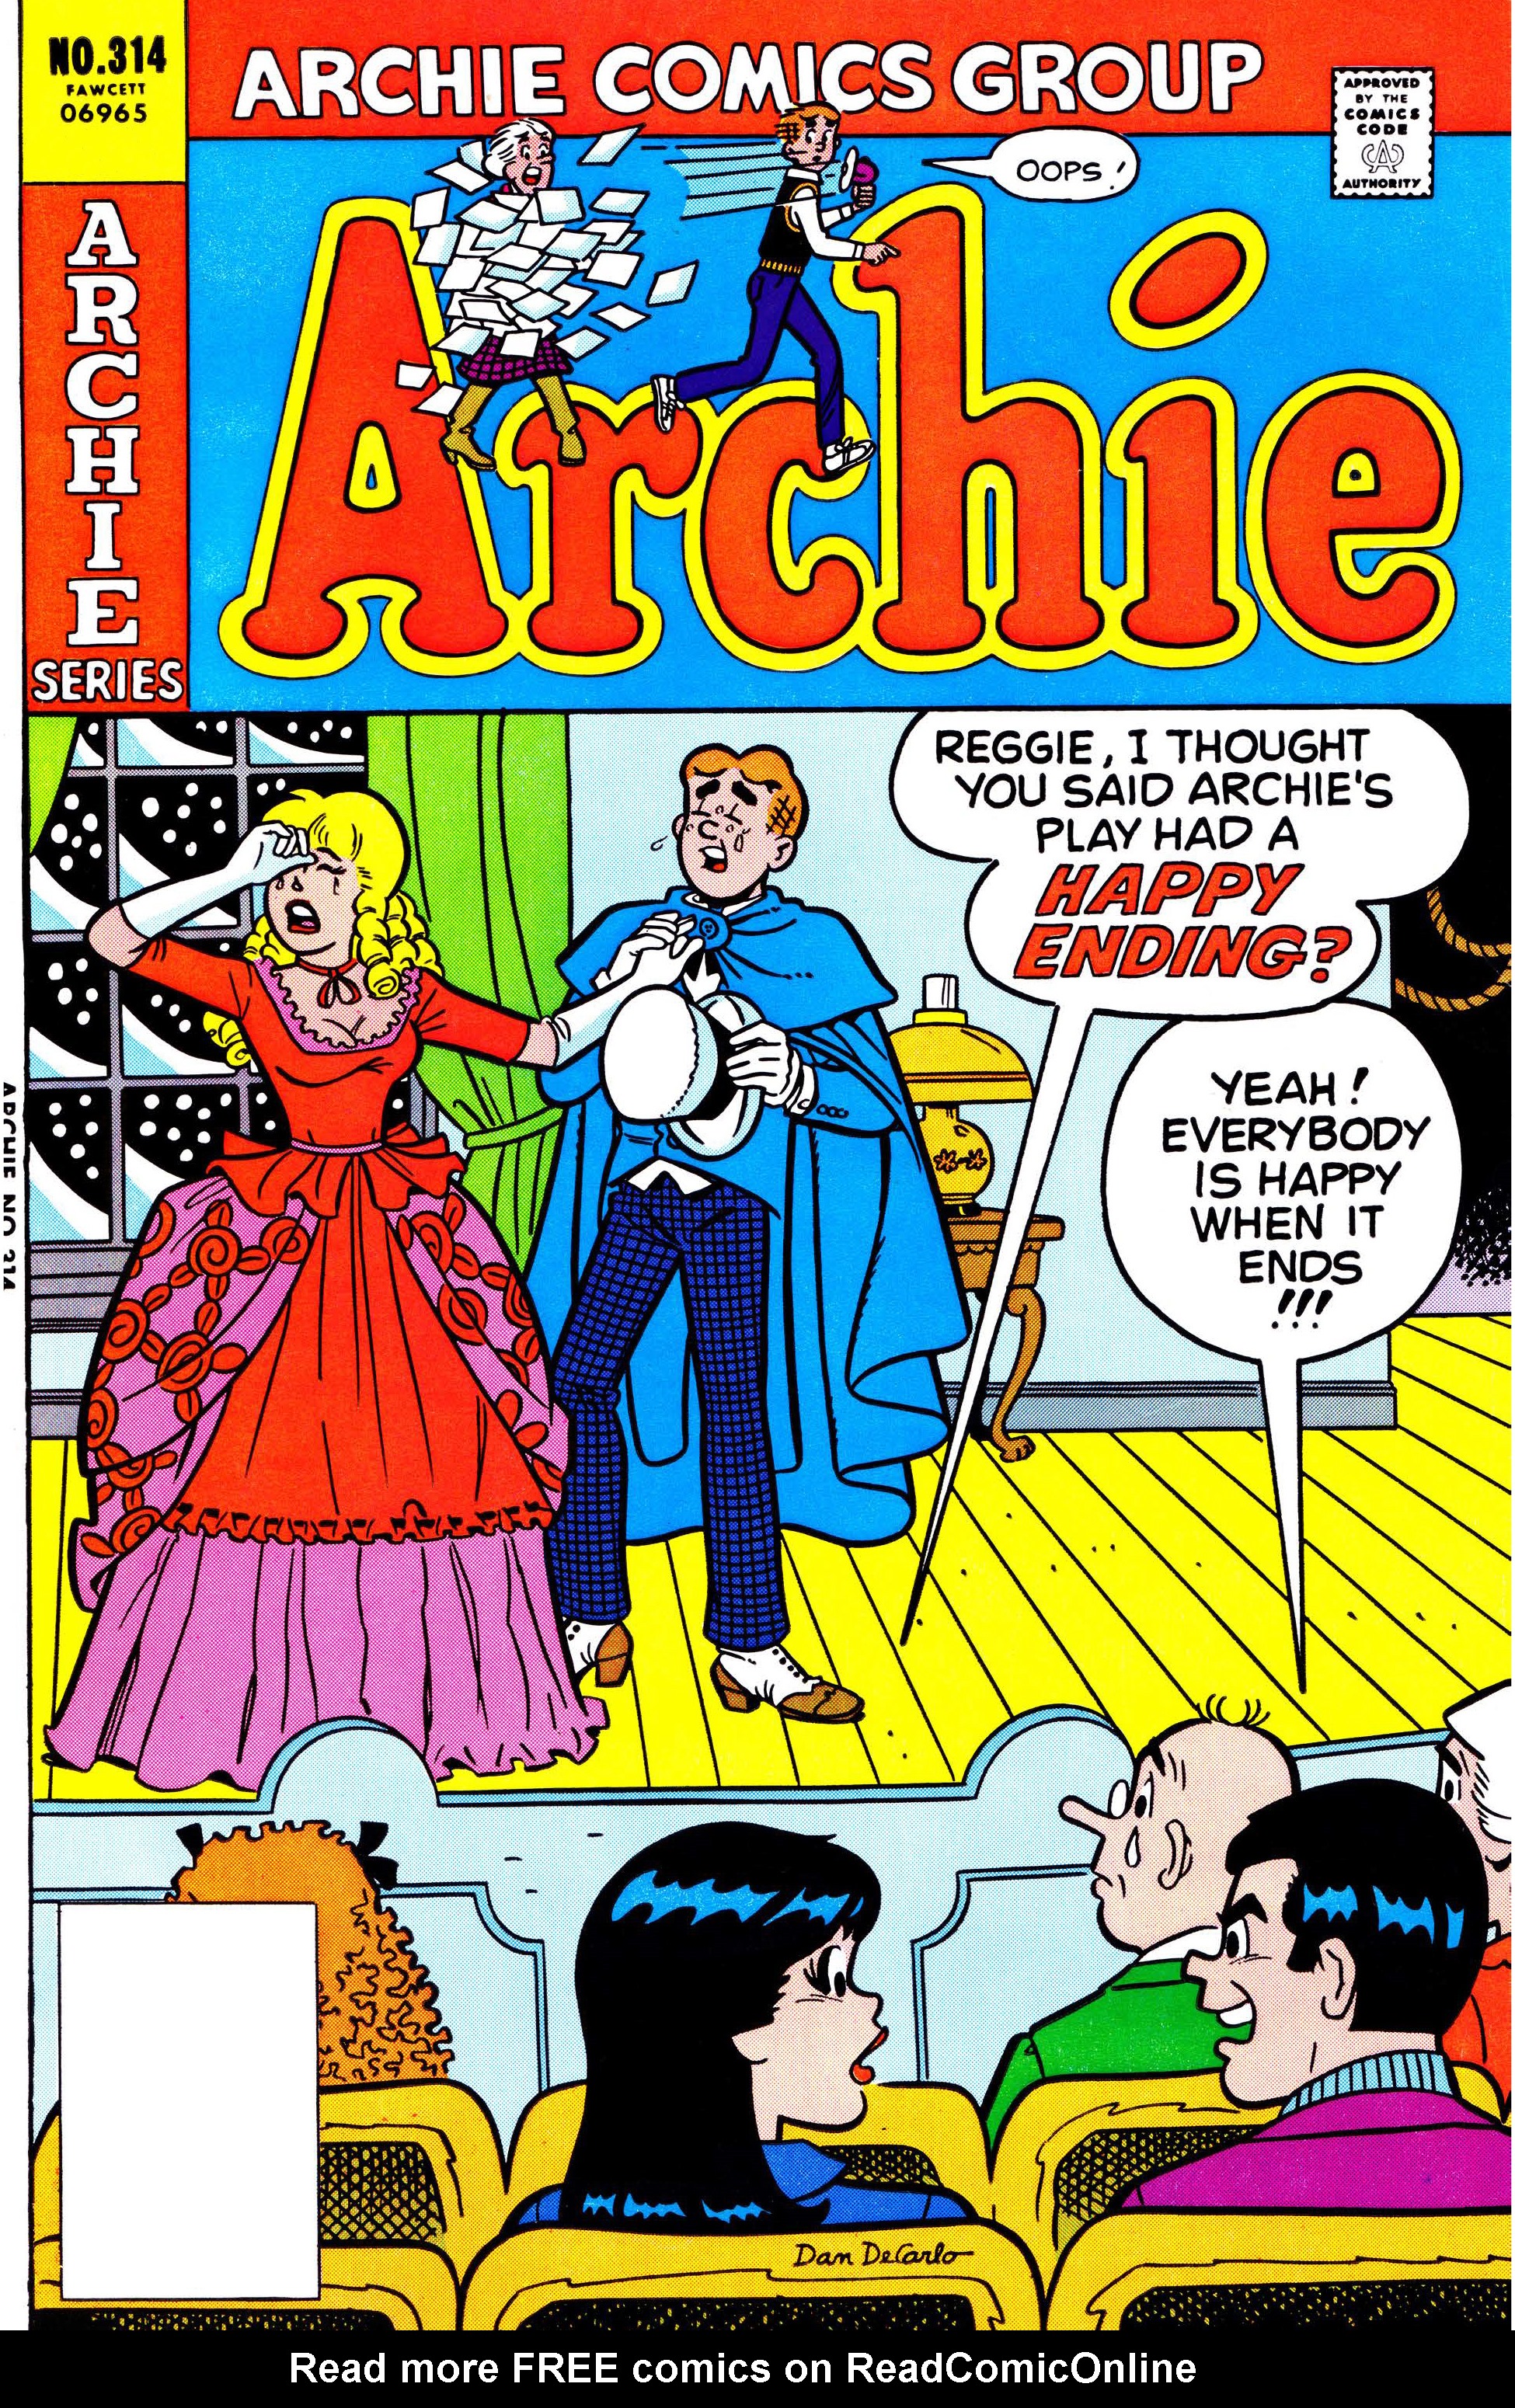 Read online Archie (1960) comic -  Issue #314 - 1